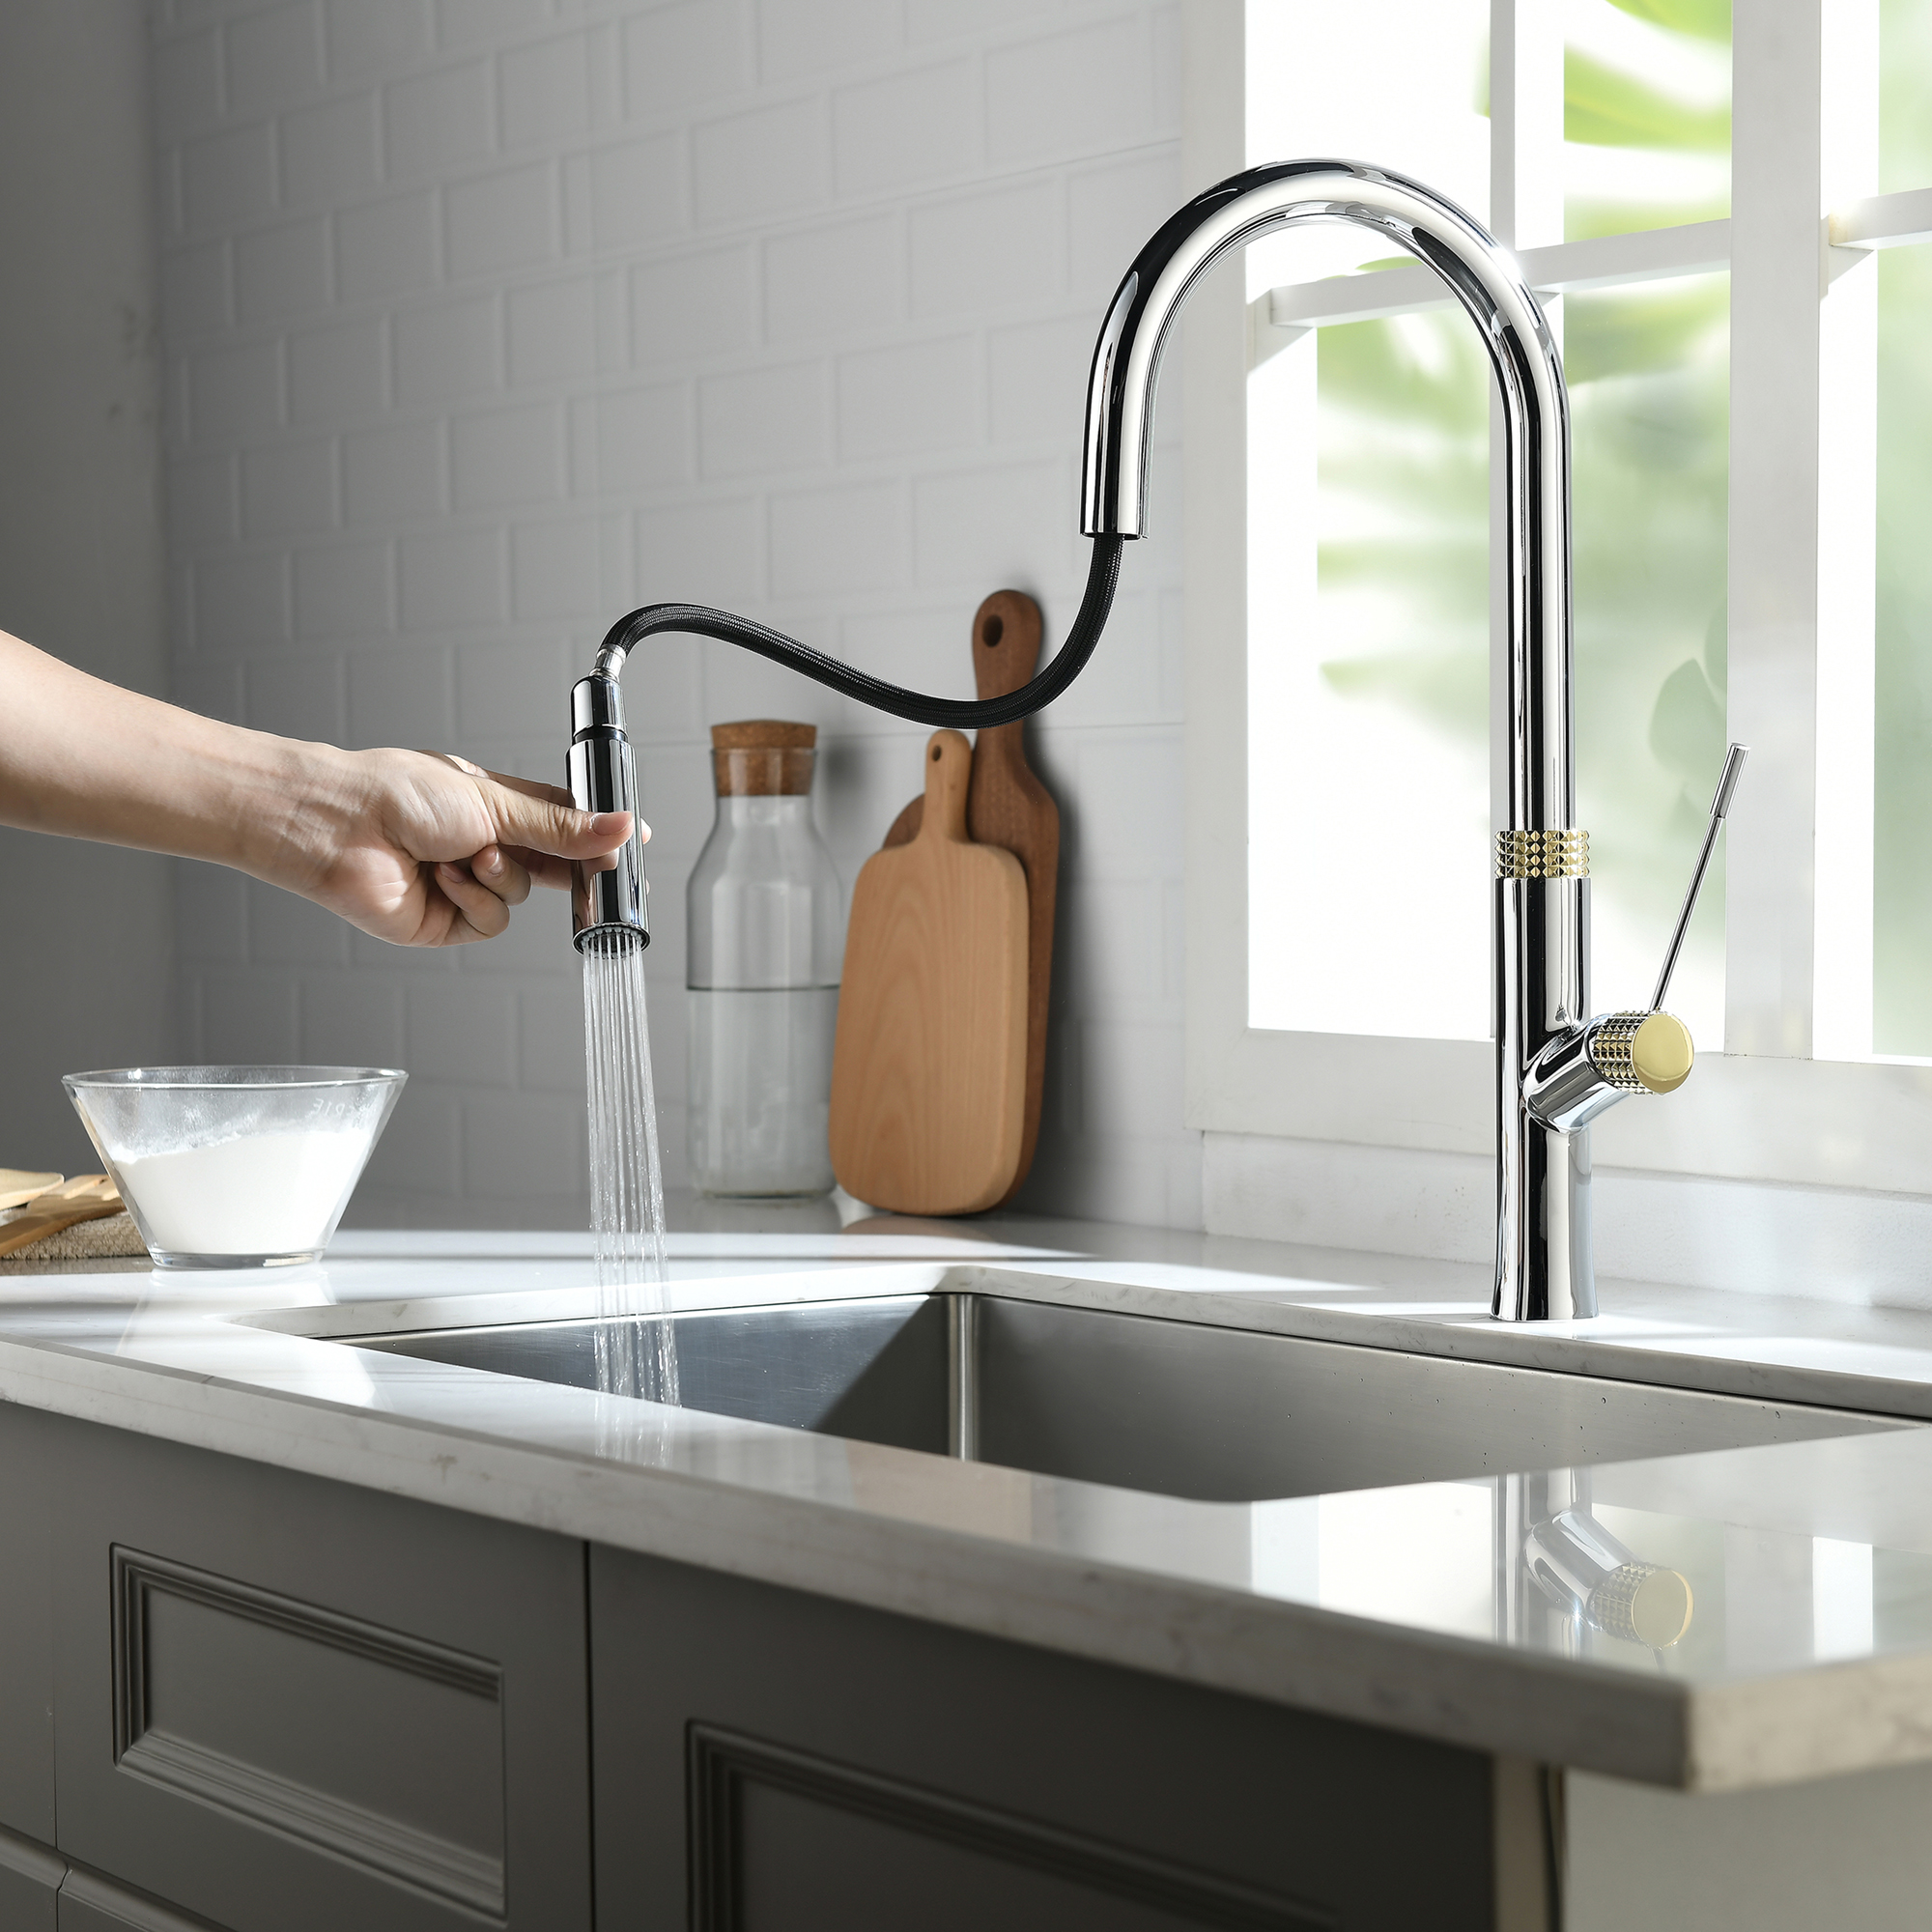 Hot Selling Brass Water Faucet Chrome Kitchen Mixer With Great Price